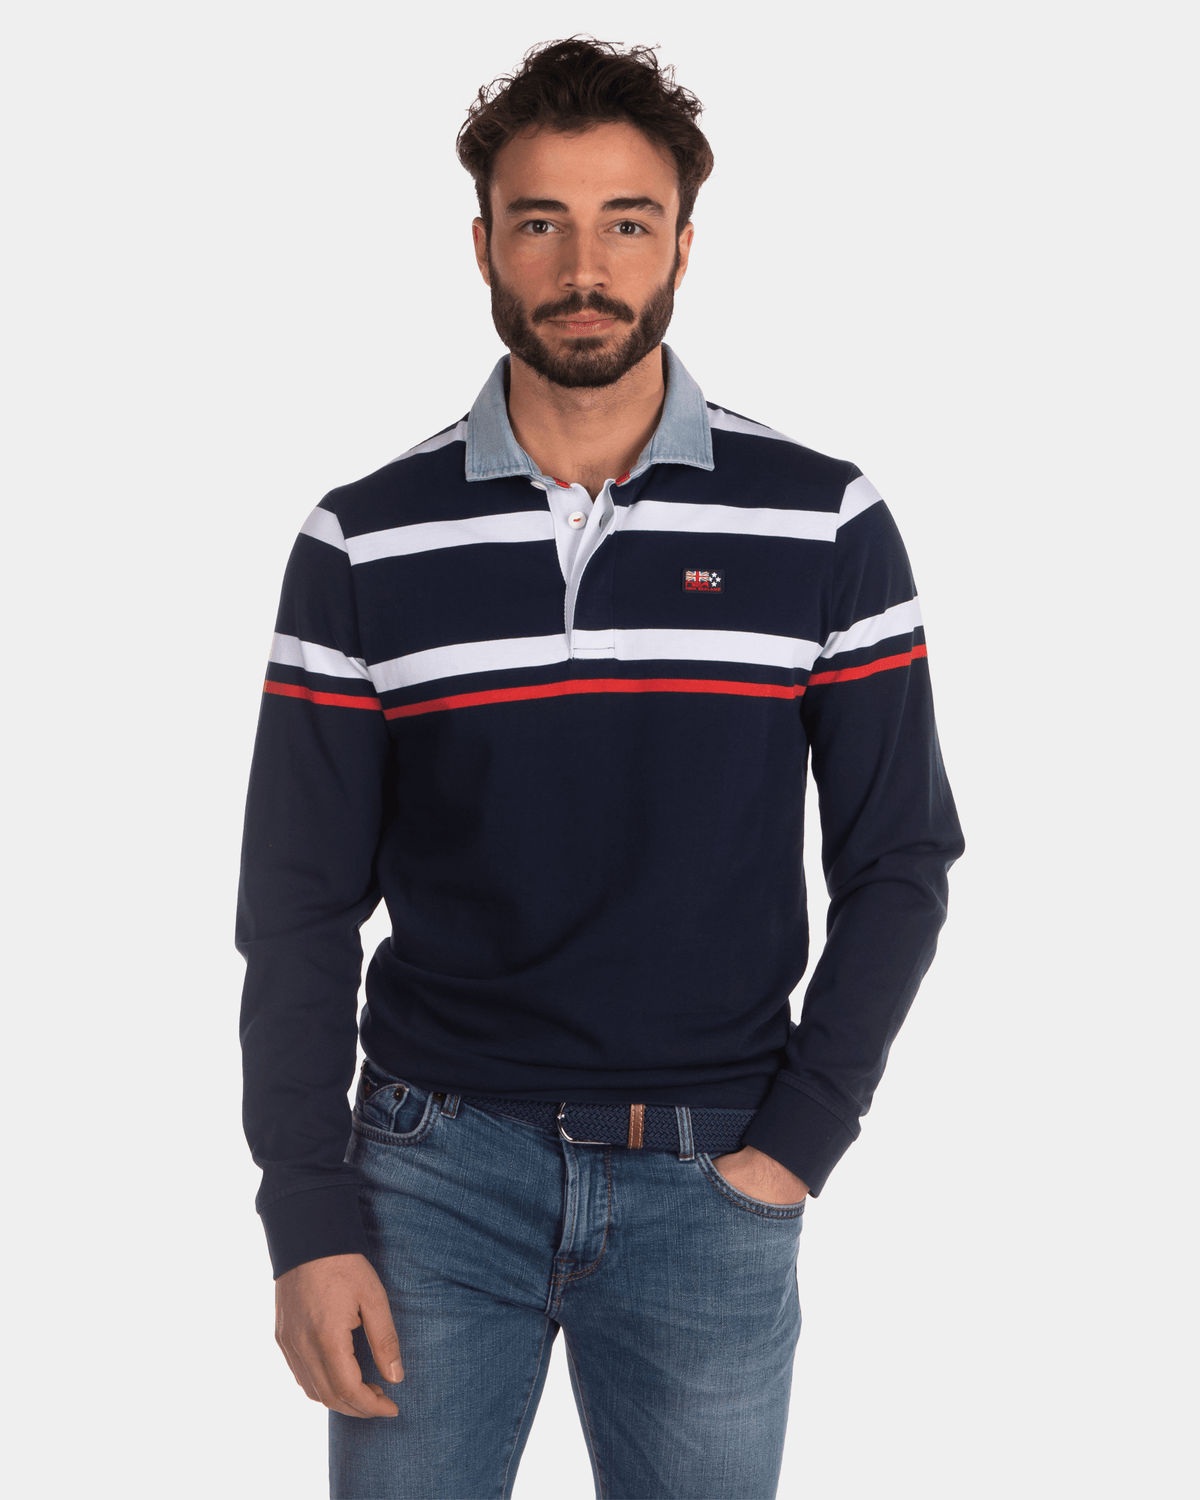 Coarse Striped Rugby Shirt Blue White Red - Industrial Navy